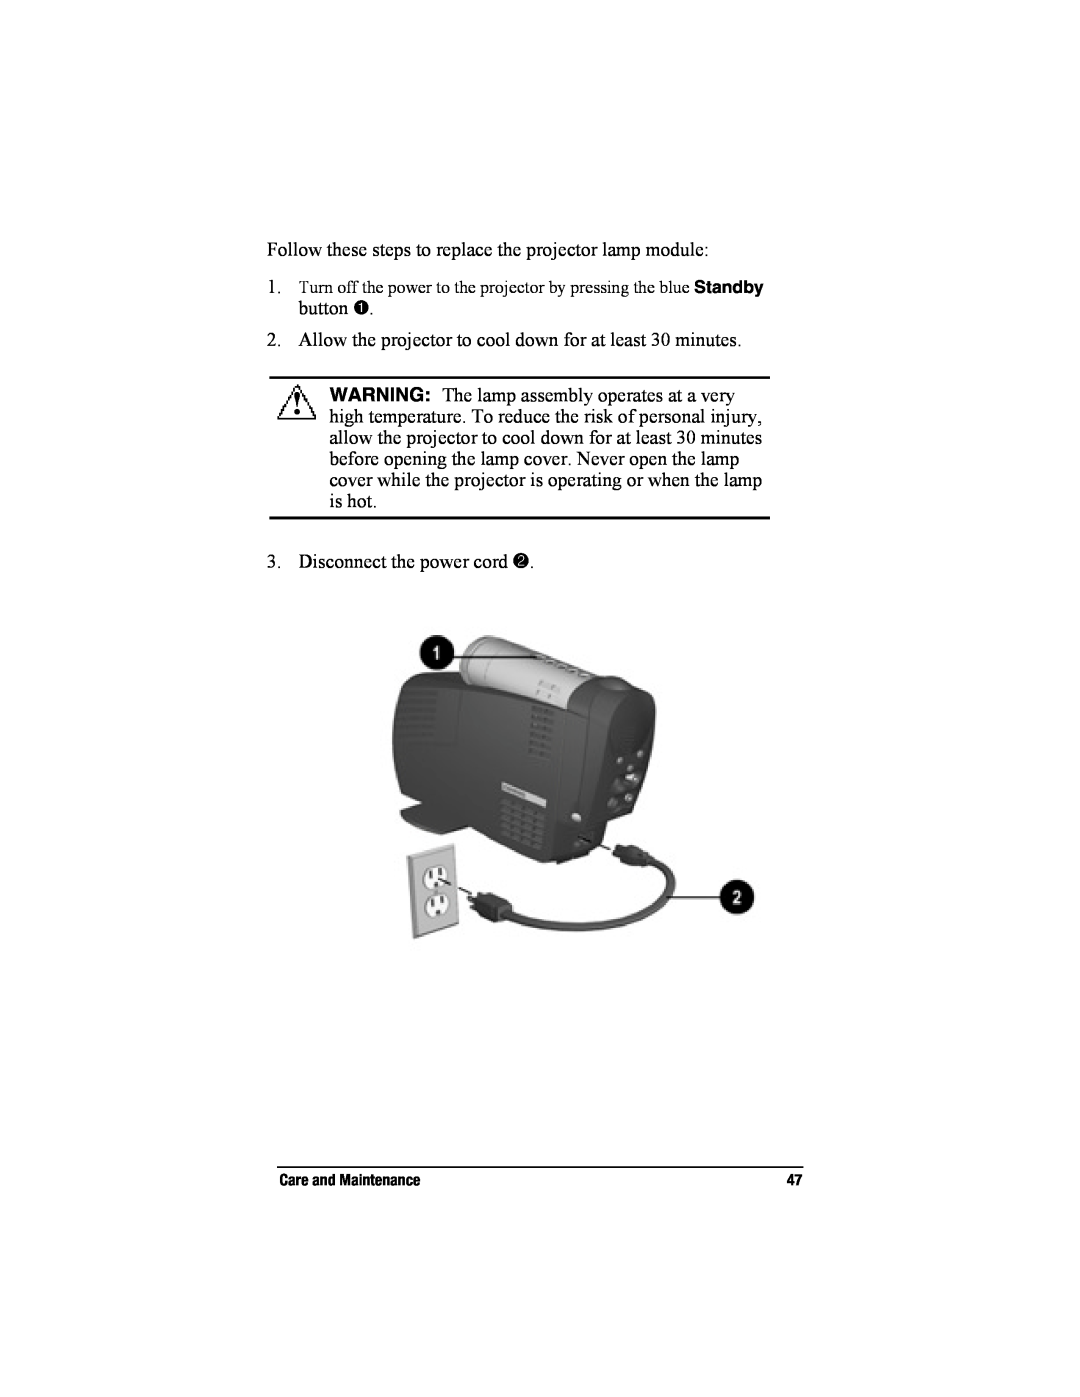 Compaq MP2800 warranty Follow these steps to replace the projector lamp module 